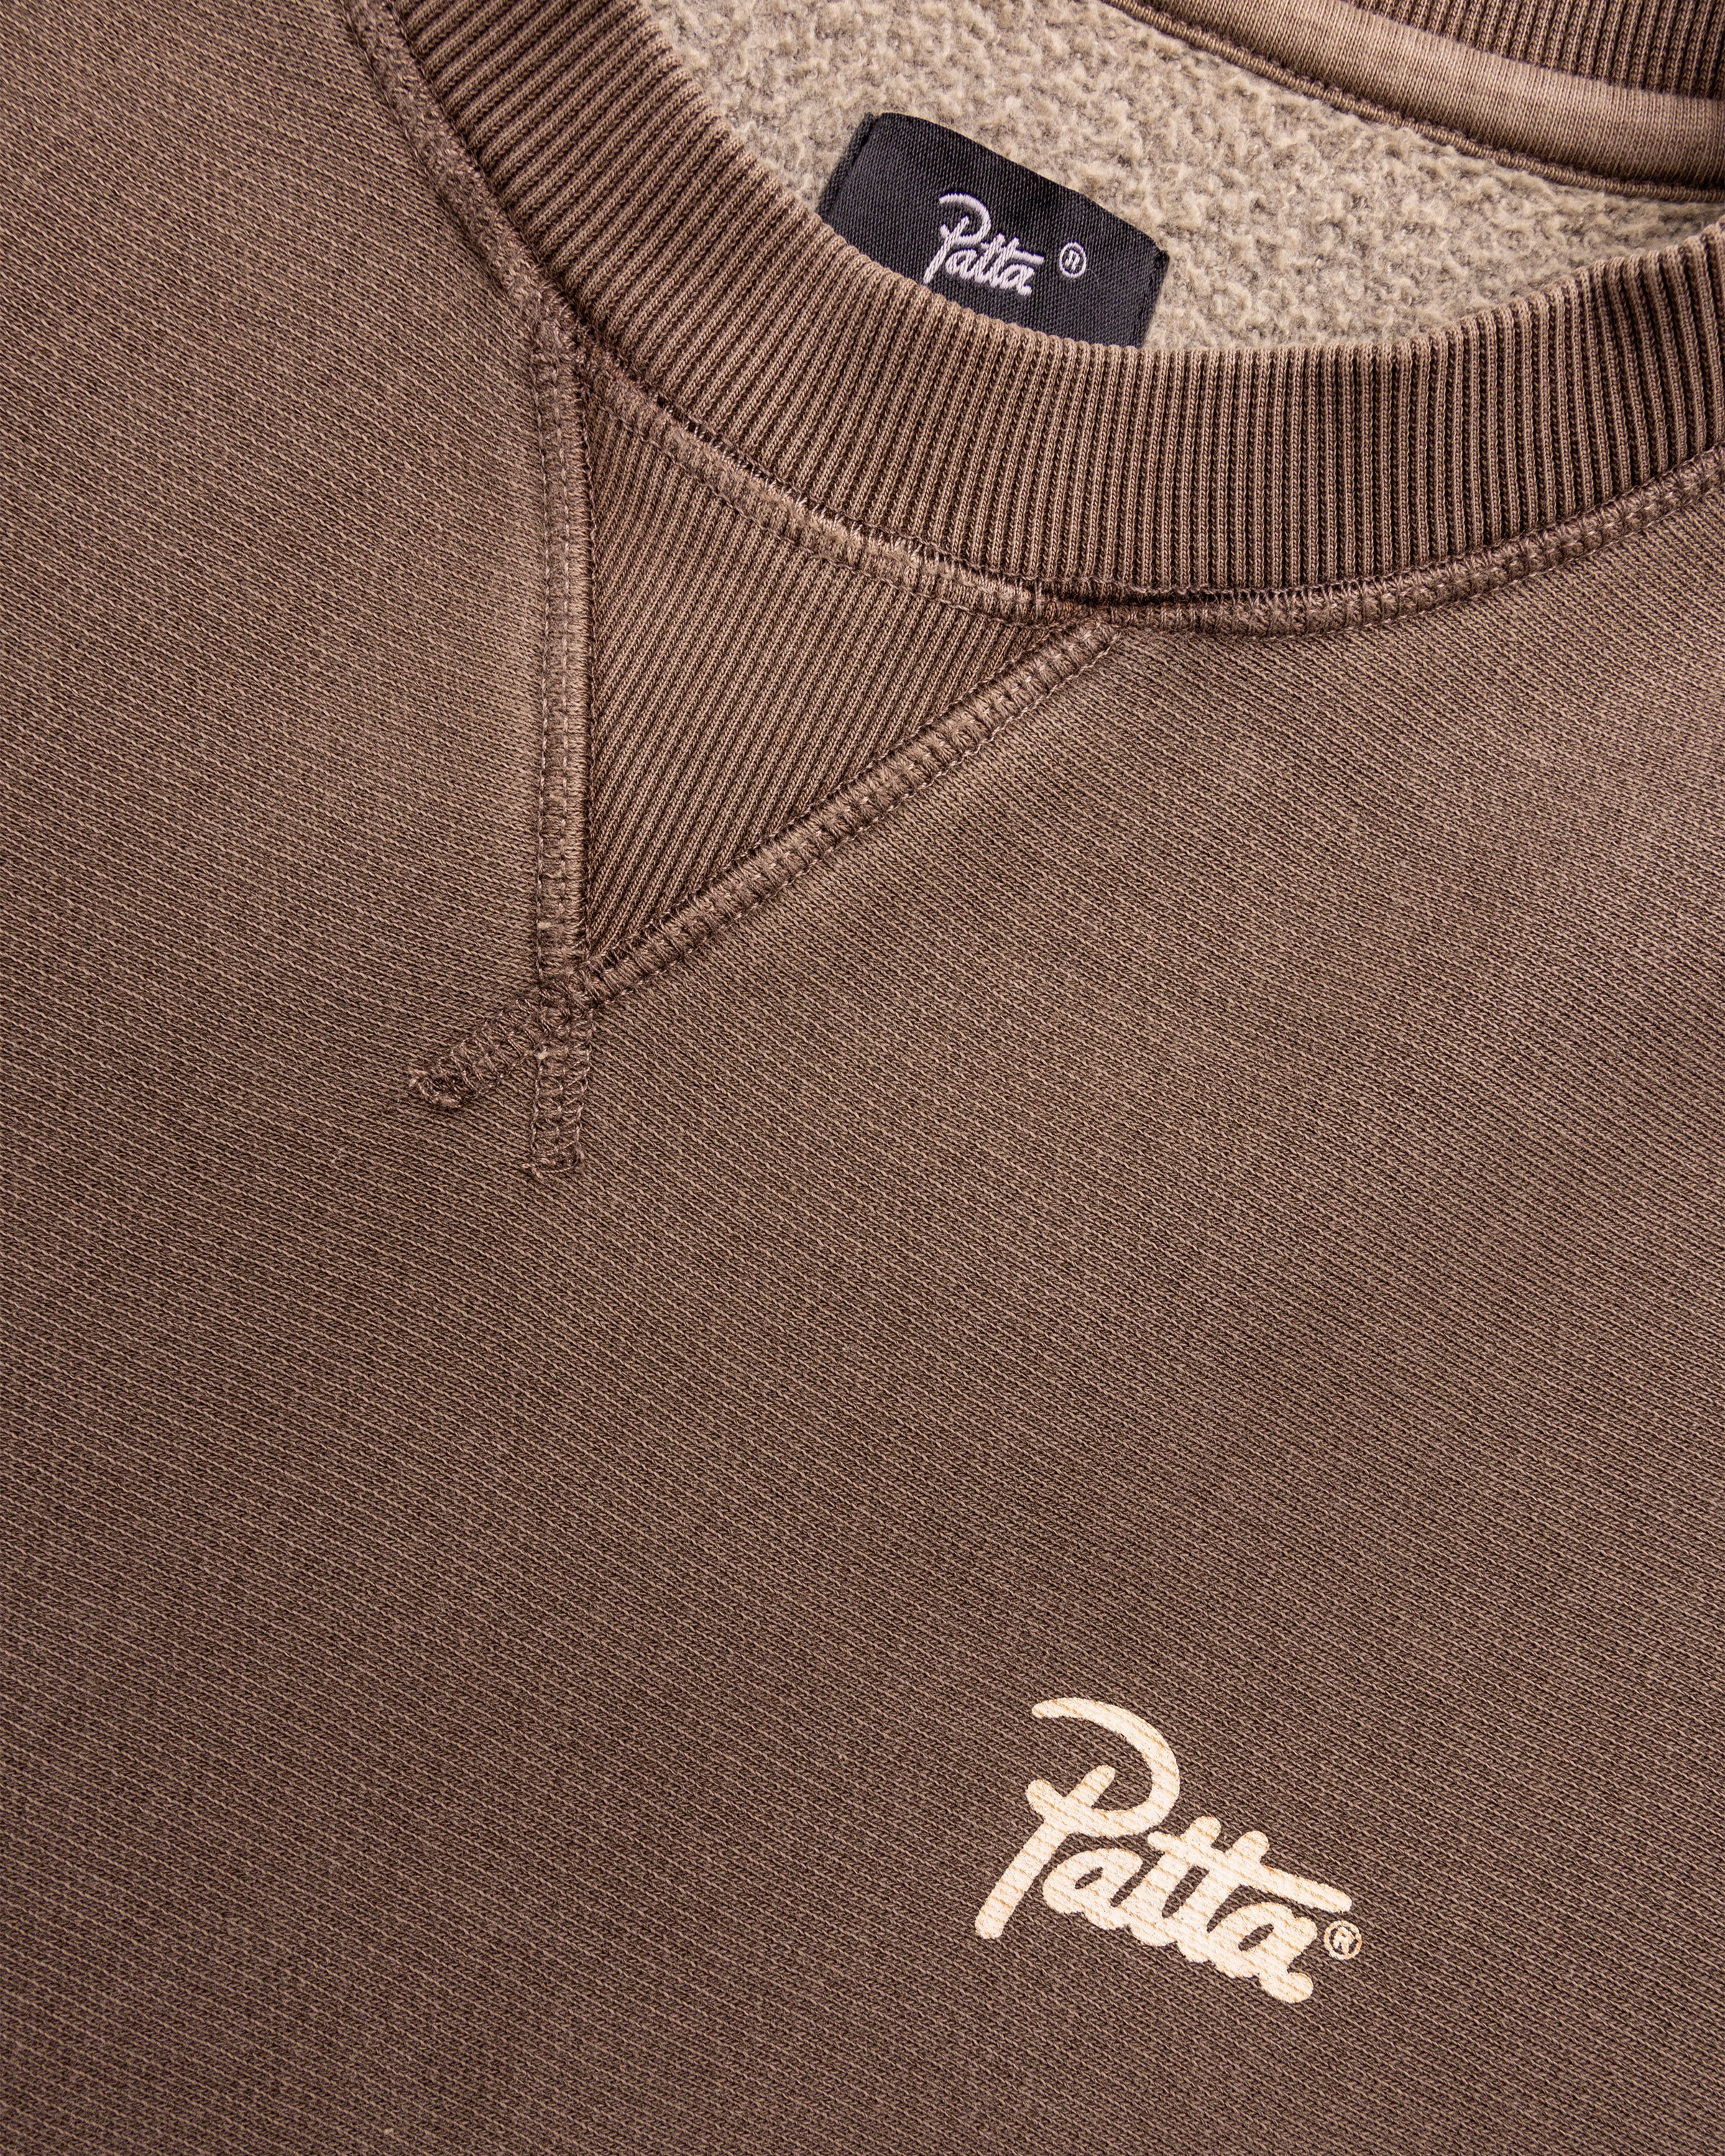 Patta - Classic Washed Crewneck Sweater Morel - Clothing - Green - Image 6